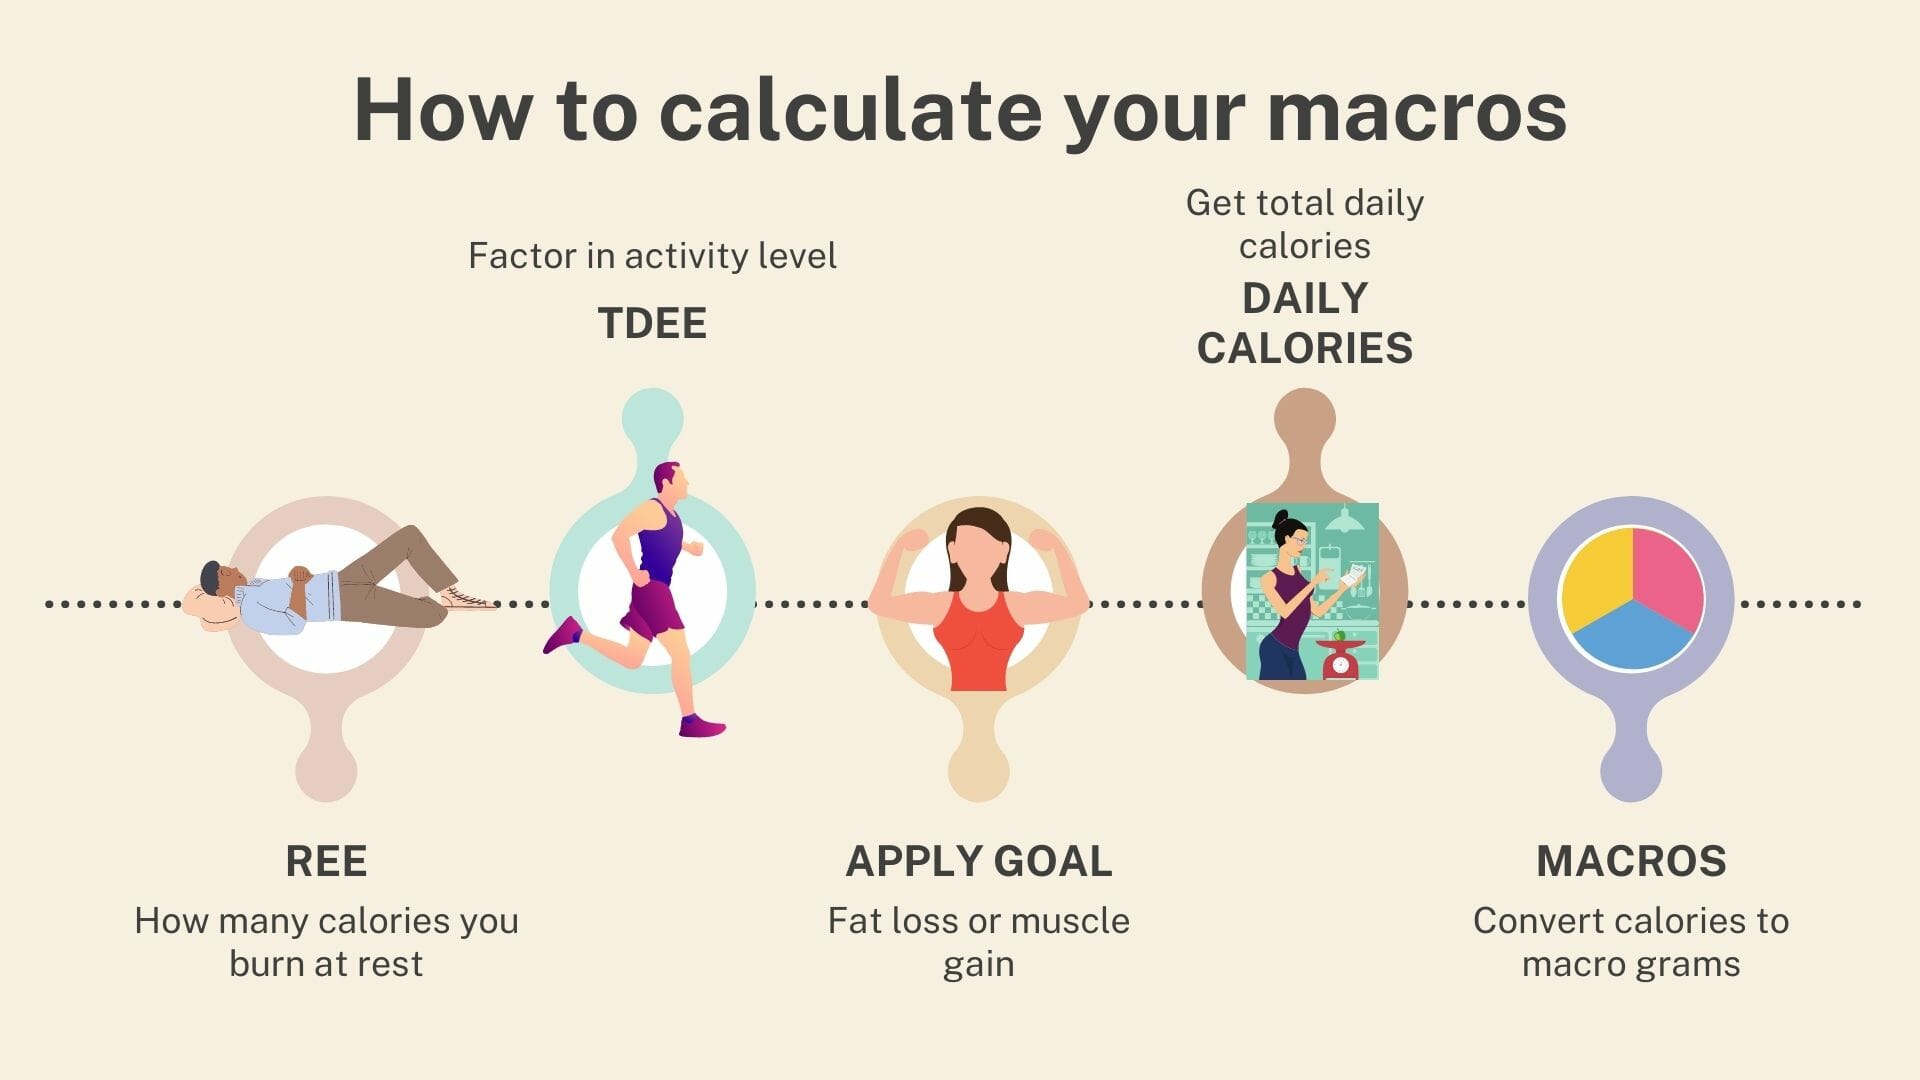 What Is the Macro Diet - How to Count Macros for Weight Loss